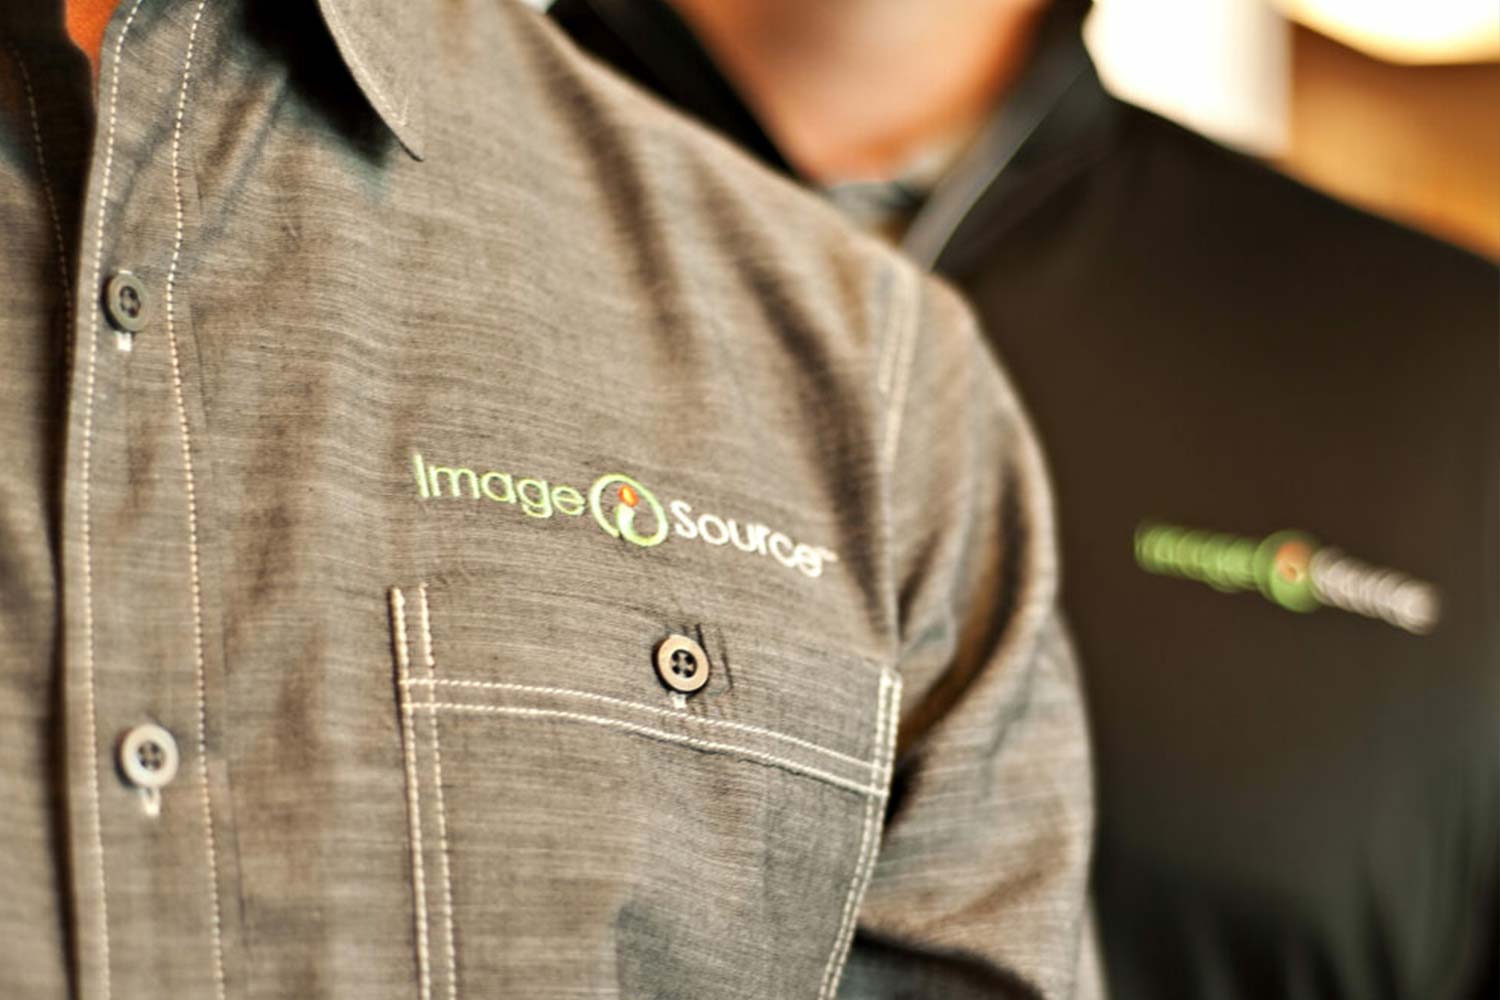 Close up image of button up shirt with Image Source logo on the left chest.